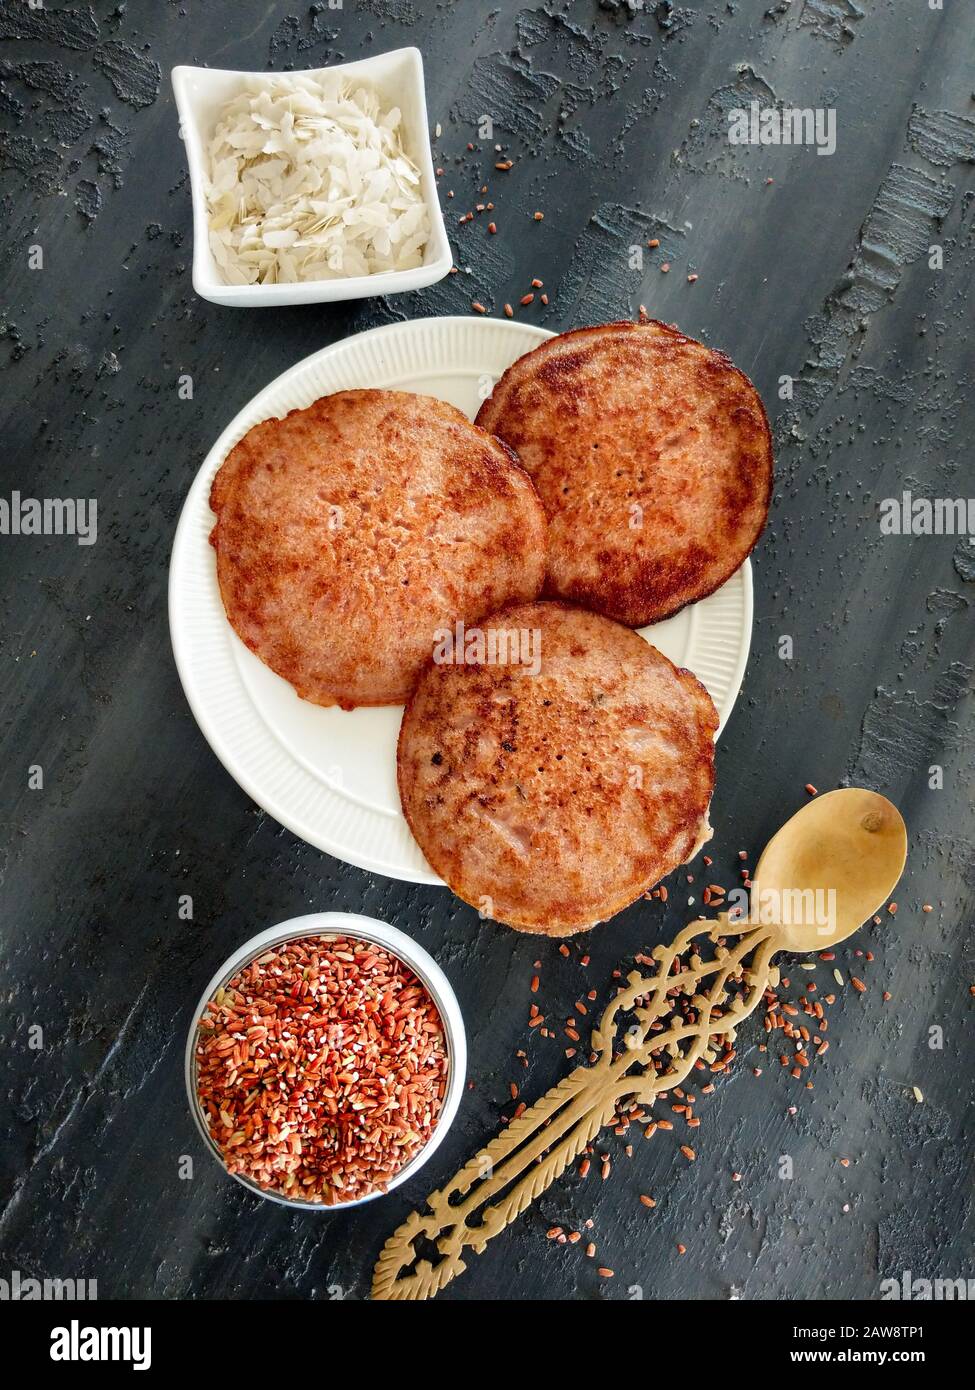 red rice pancakes, Fermented and steamed Indian rice pancakes, challapongaram, south indian recipes, appam, cafe, tasty, food, kitchen, organic, vegan Stock Photo